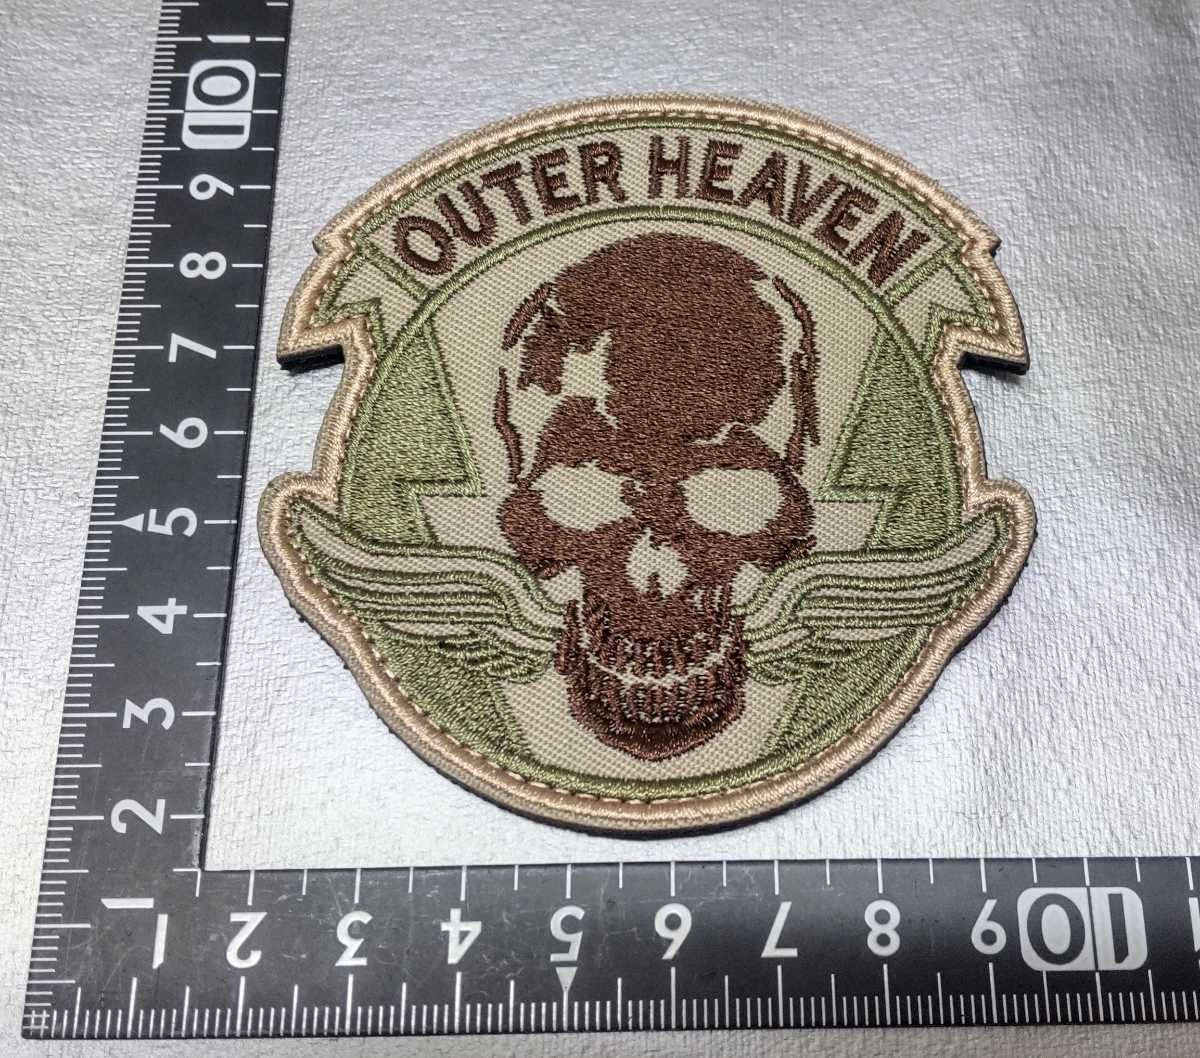 OUTER HEAVEN military Logo badge # velcro Metal Gear Solid METAL GEAR small island preeminence Hara KOJIMA DEATH STRANDING patch airsoft 